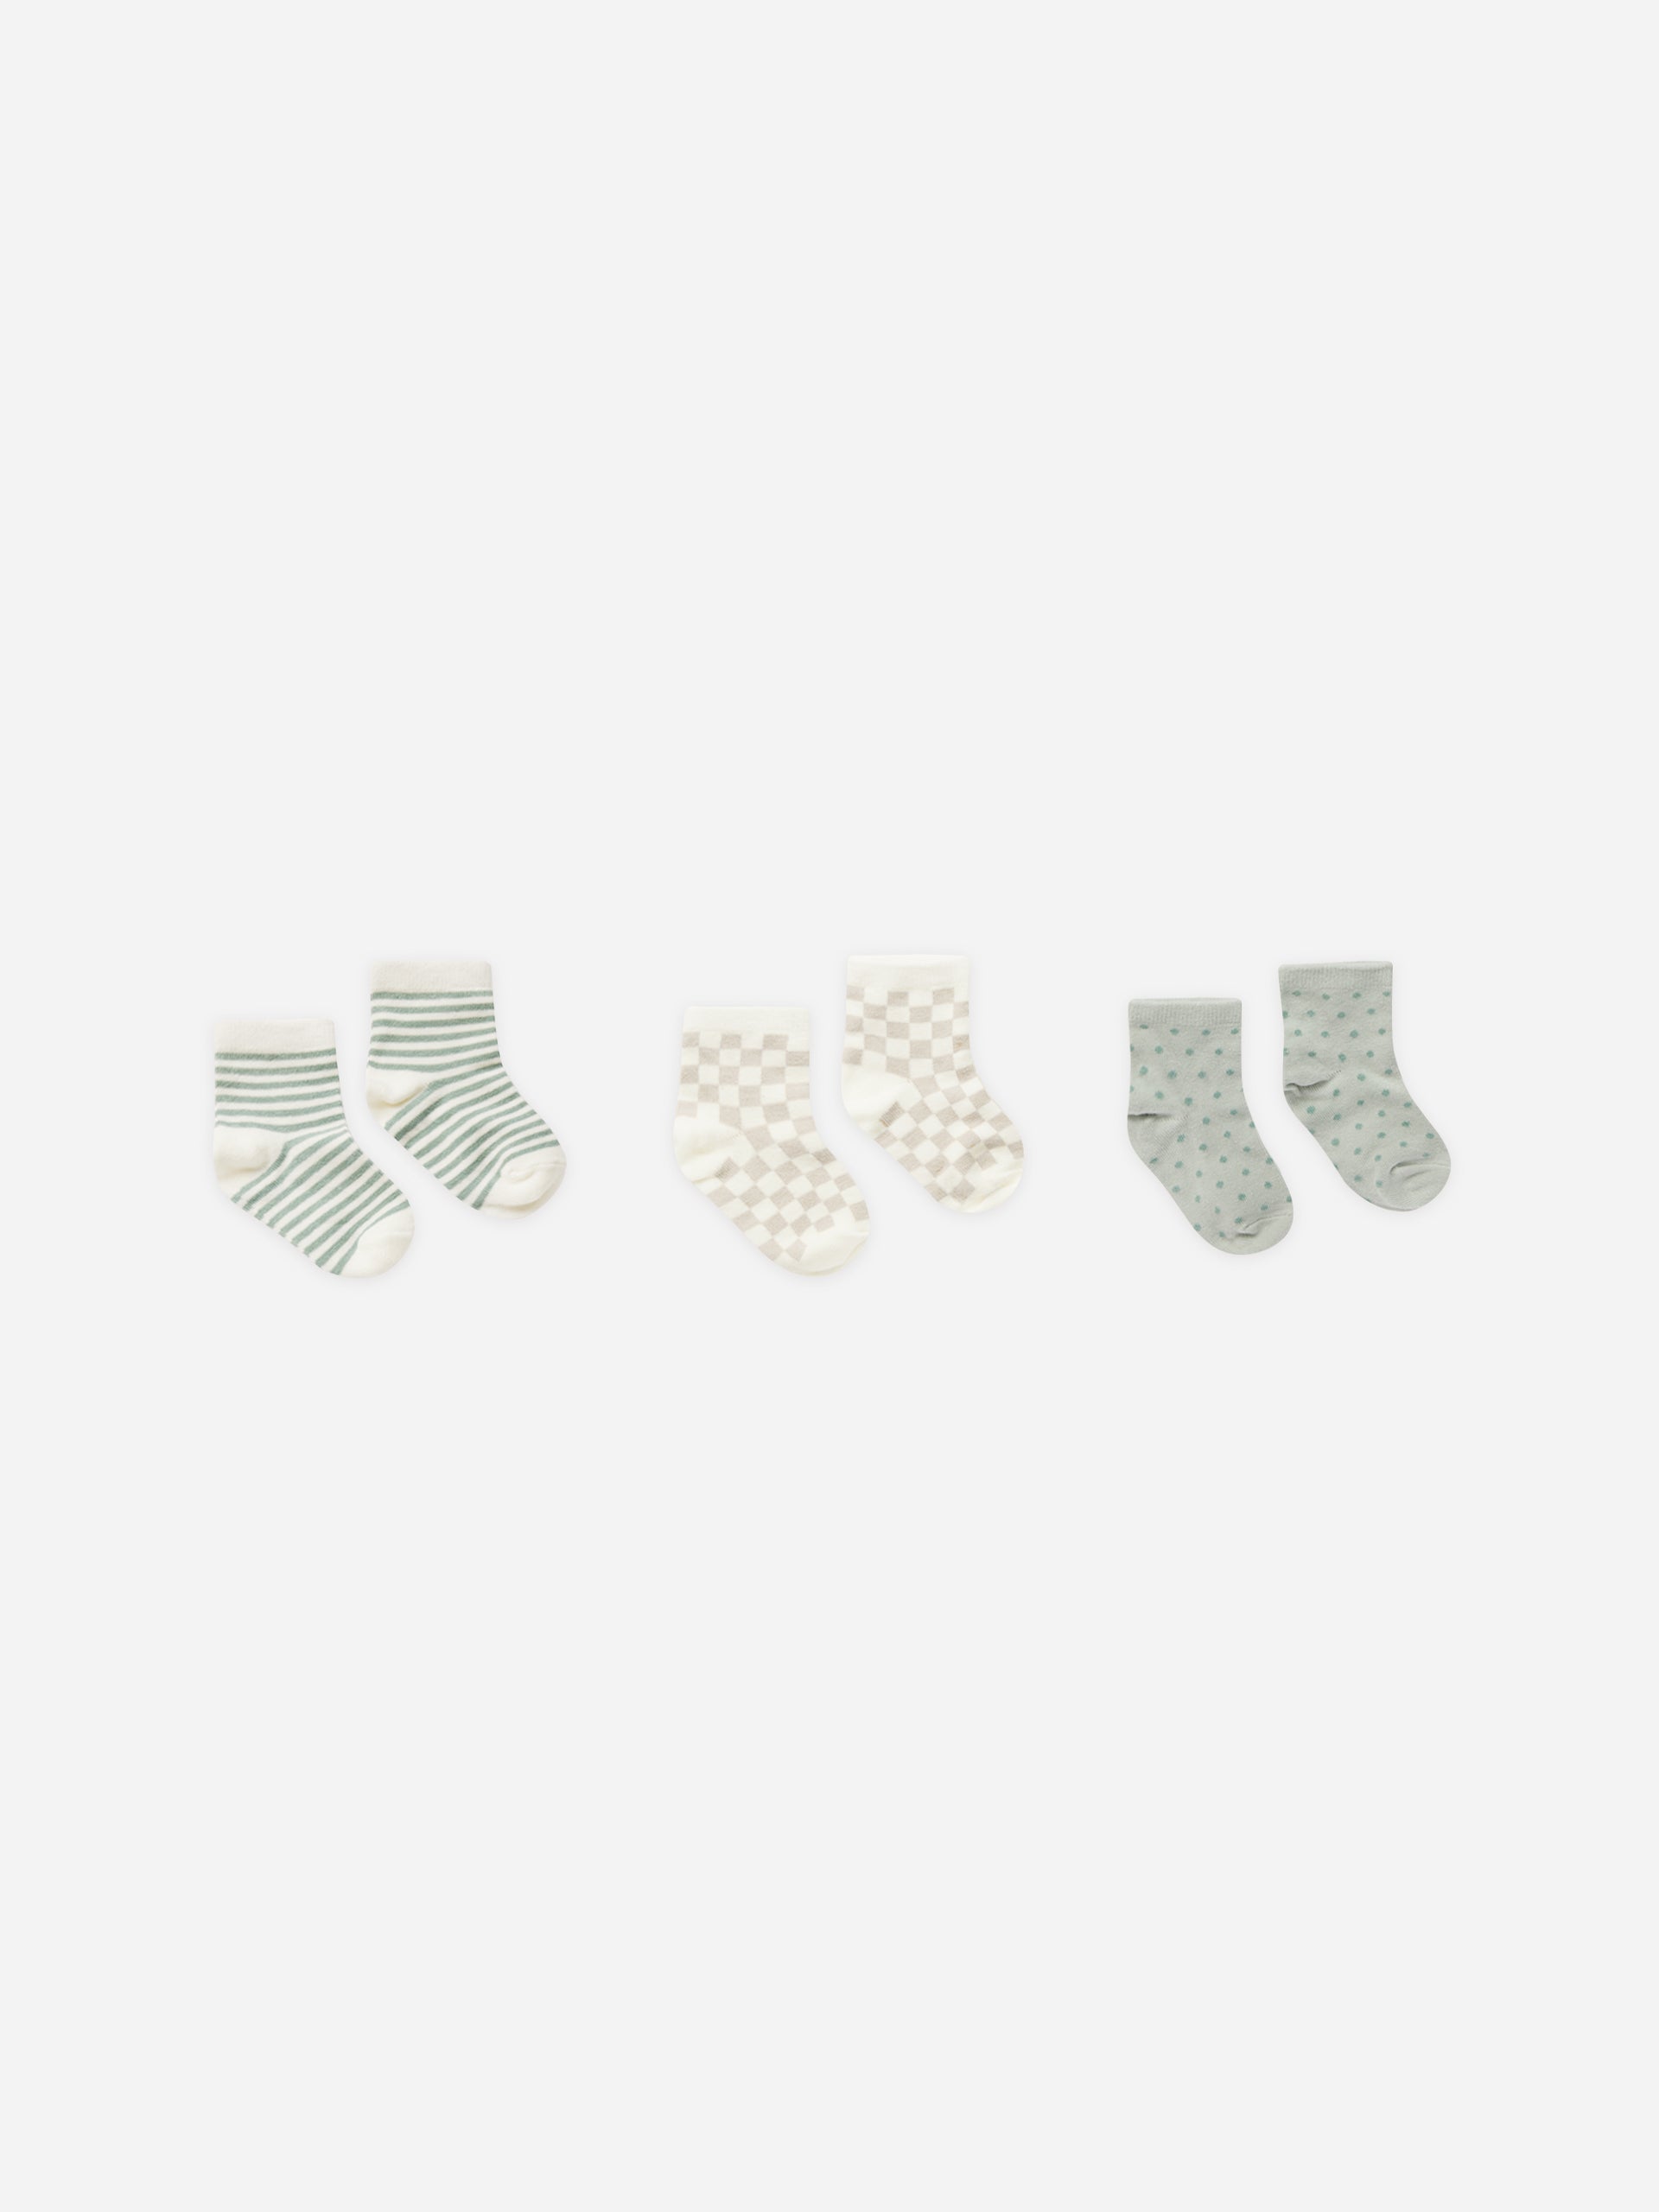 Printed Socks || Summer Stripe, Dove Check, Polka Dot - Rylee + Cru | Kids Clothes | Trendy Baby Clothes | Modern Infant Outfits |